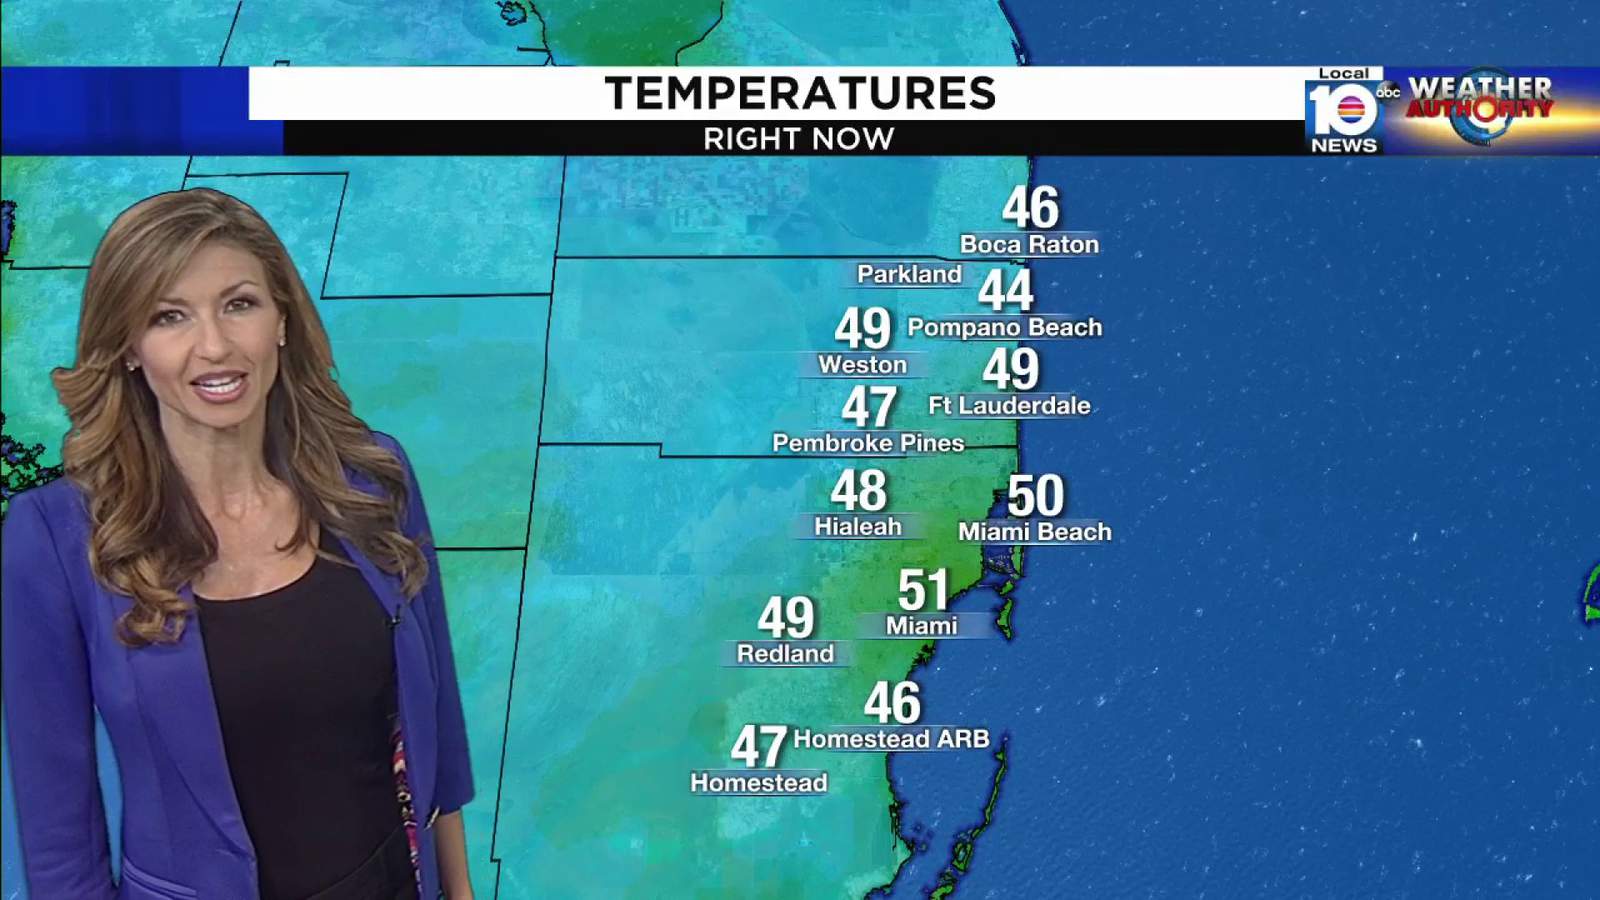 South Florida braces for coldest night of the year